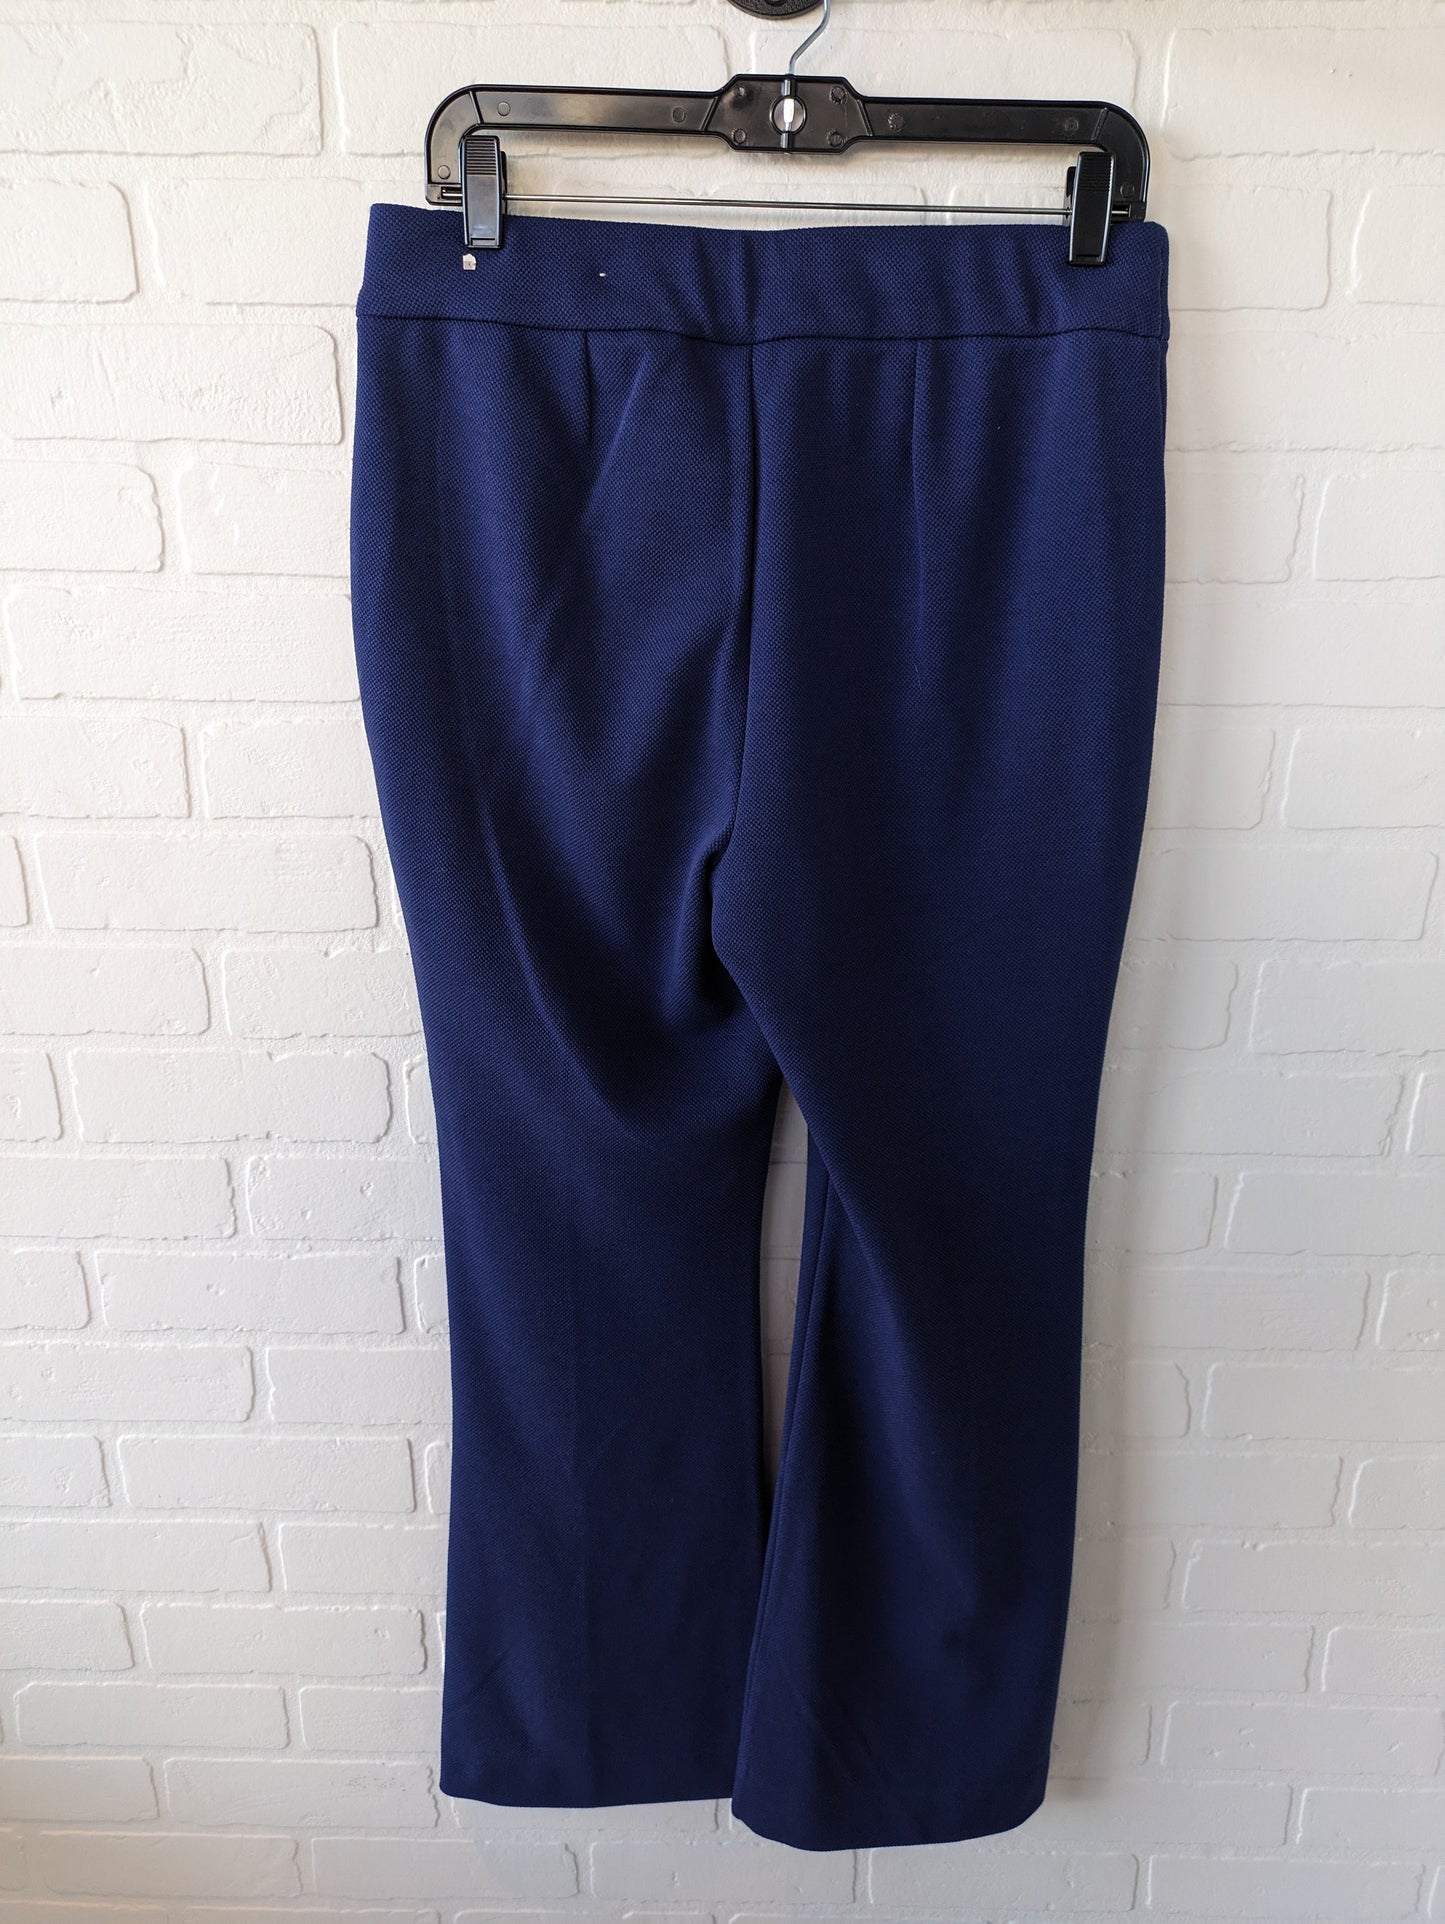 Pants Ankle By Chicos  Size: 8petite